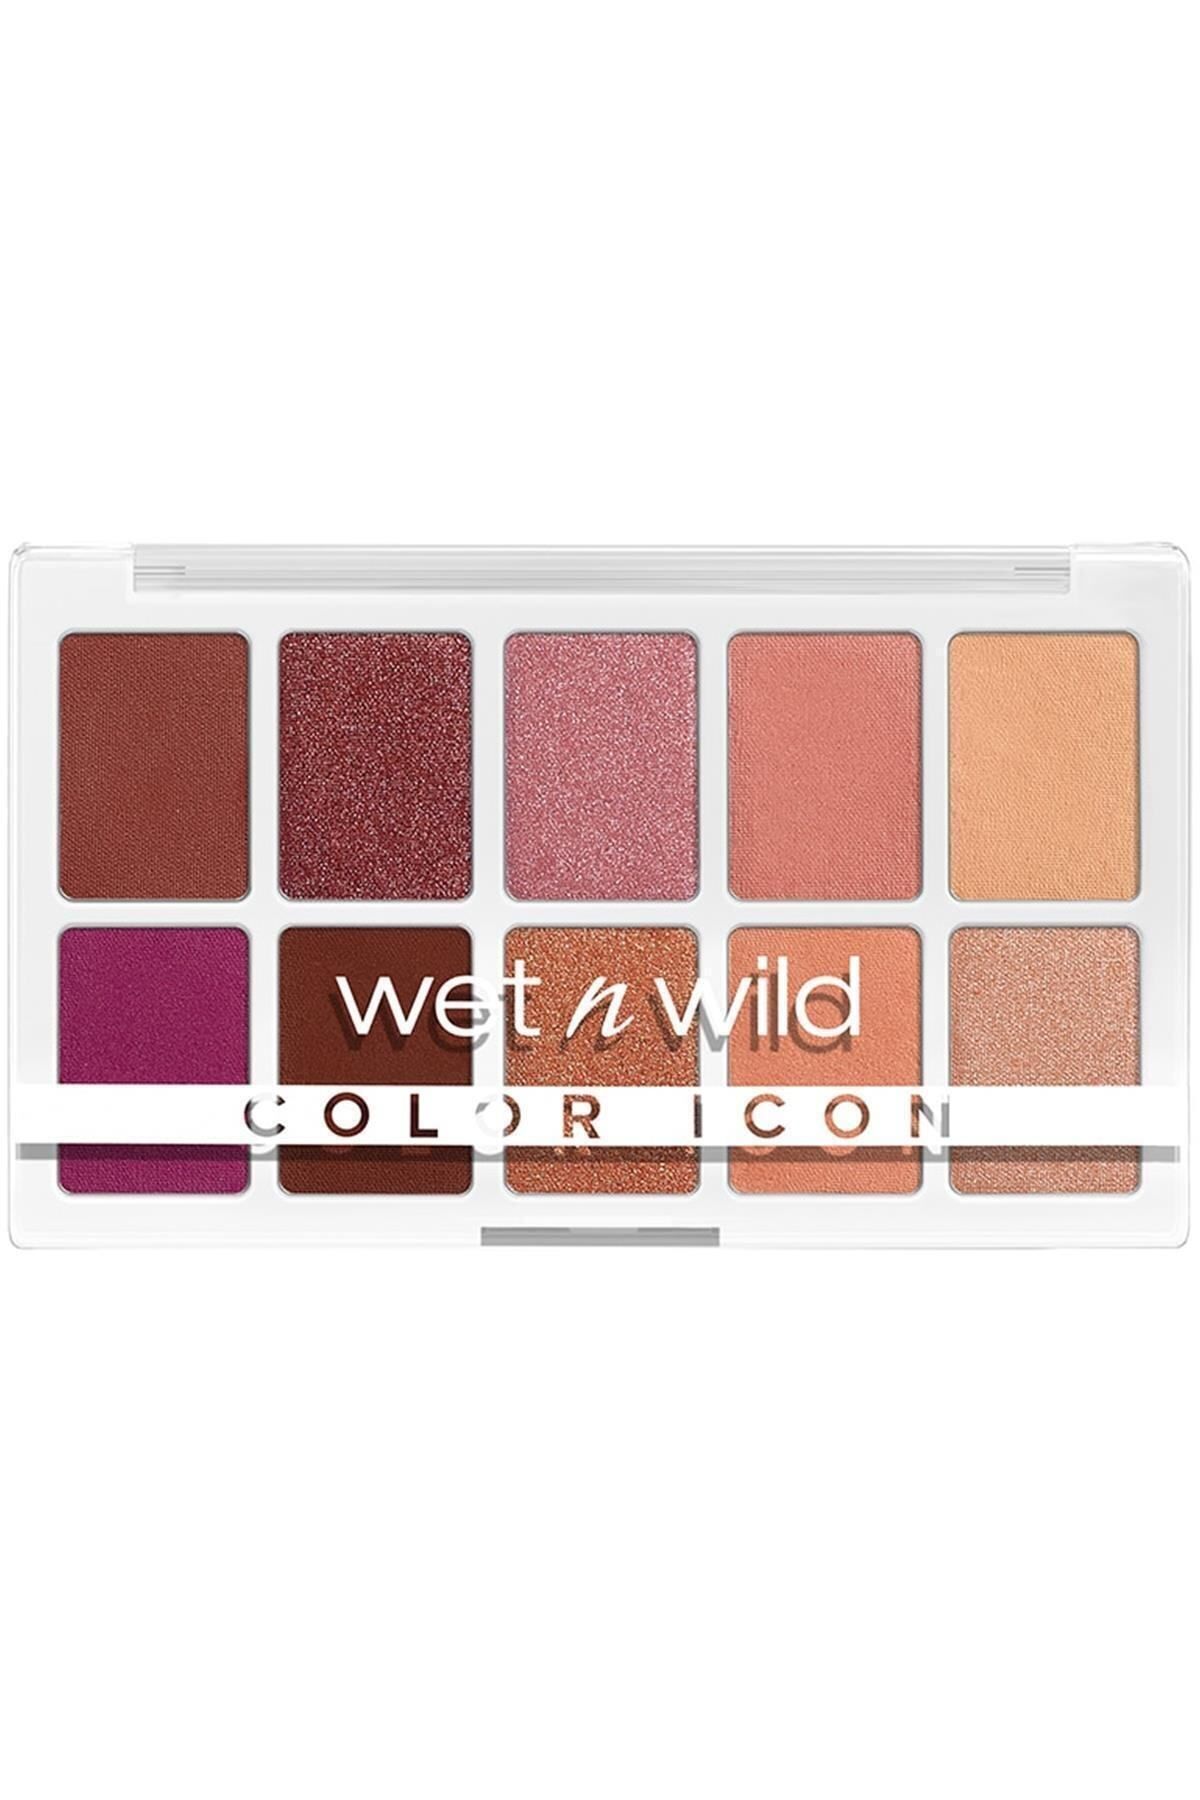 WET N WİLD Color Icon 10’lu Far Paleti Heart and Sol